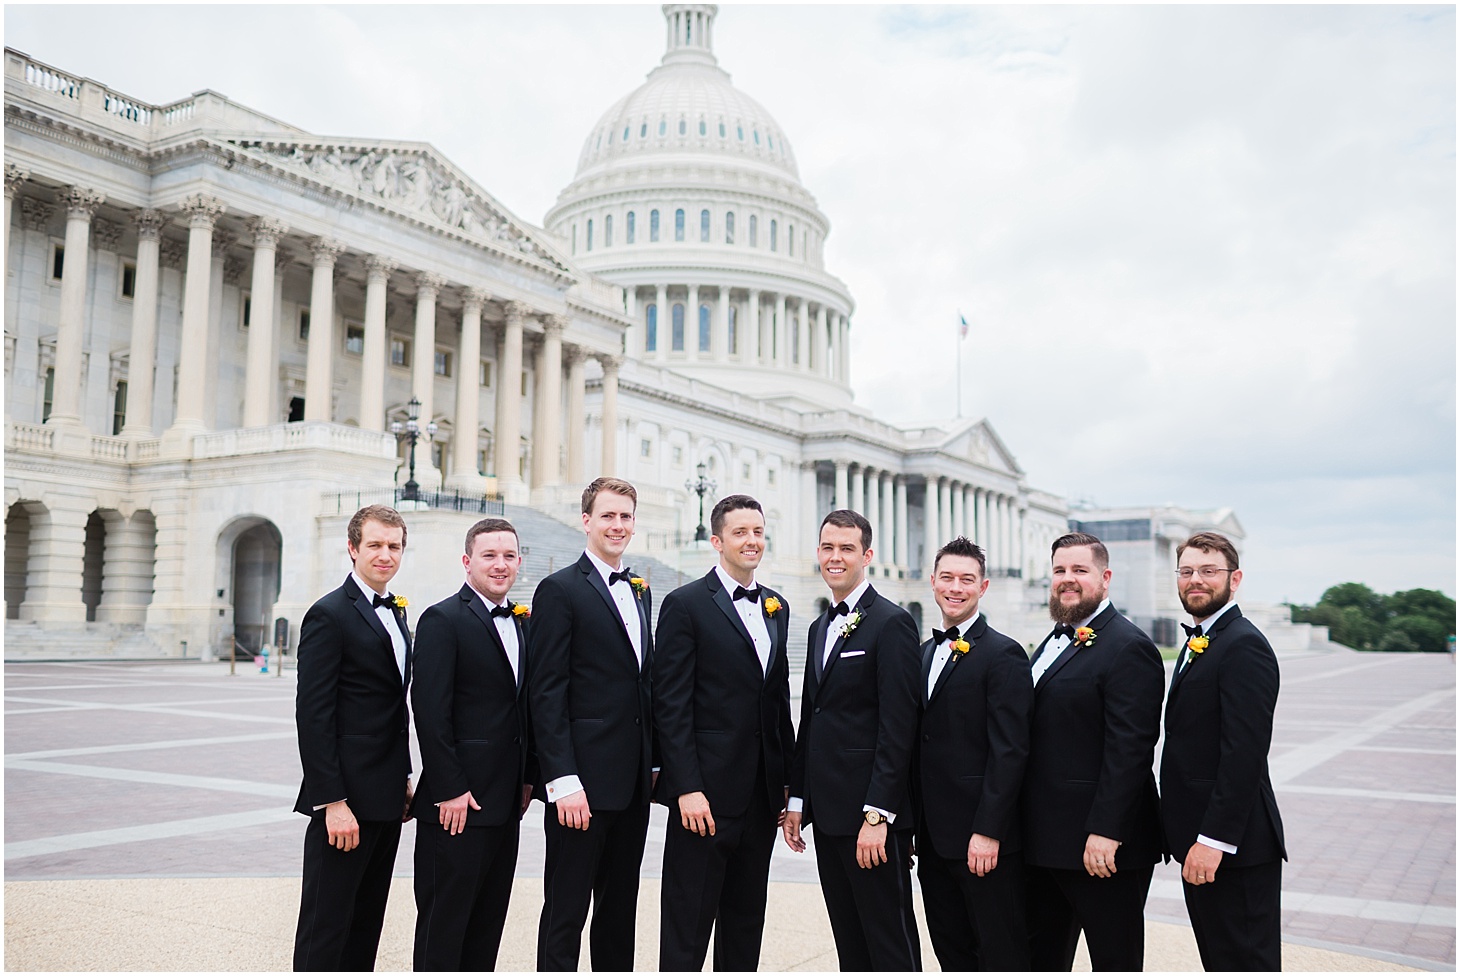 Wedding Party Portraits at Capitol, Black Tie Hay-Adams Wedding with Summer Florals, Ceremony at Capitol Hill Baptist Church, Sarah Bradshaw Photography, DC Wedding Photographer